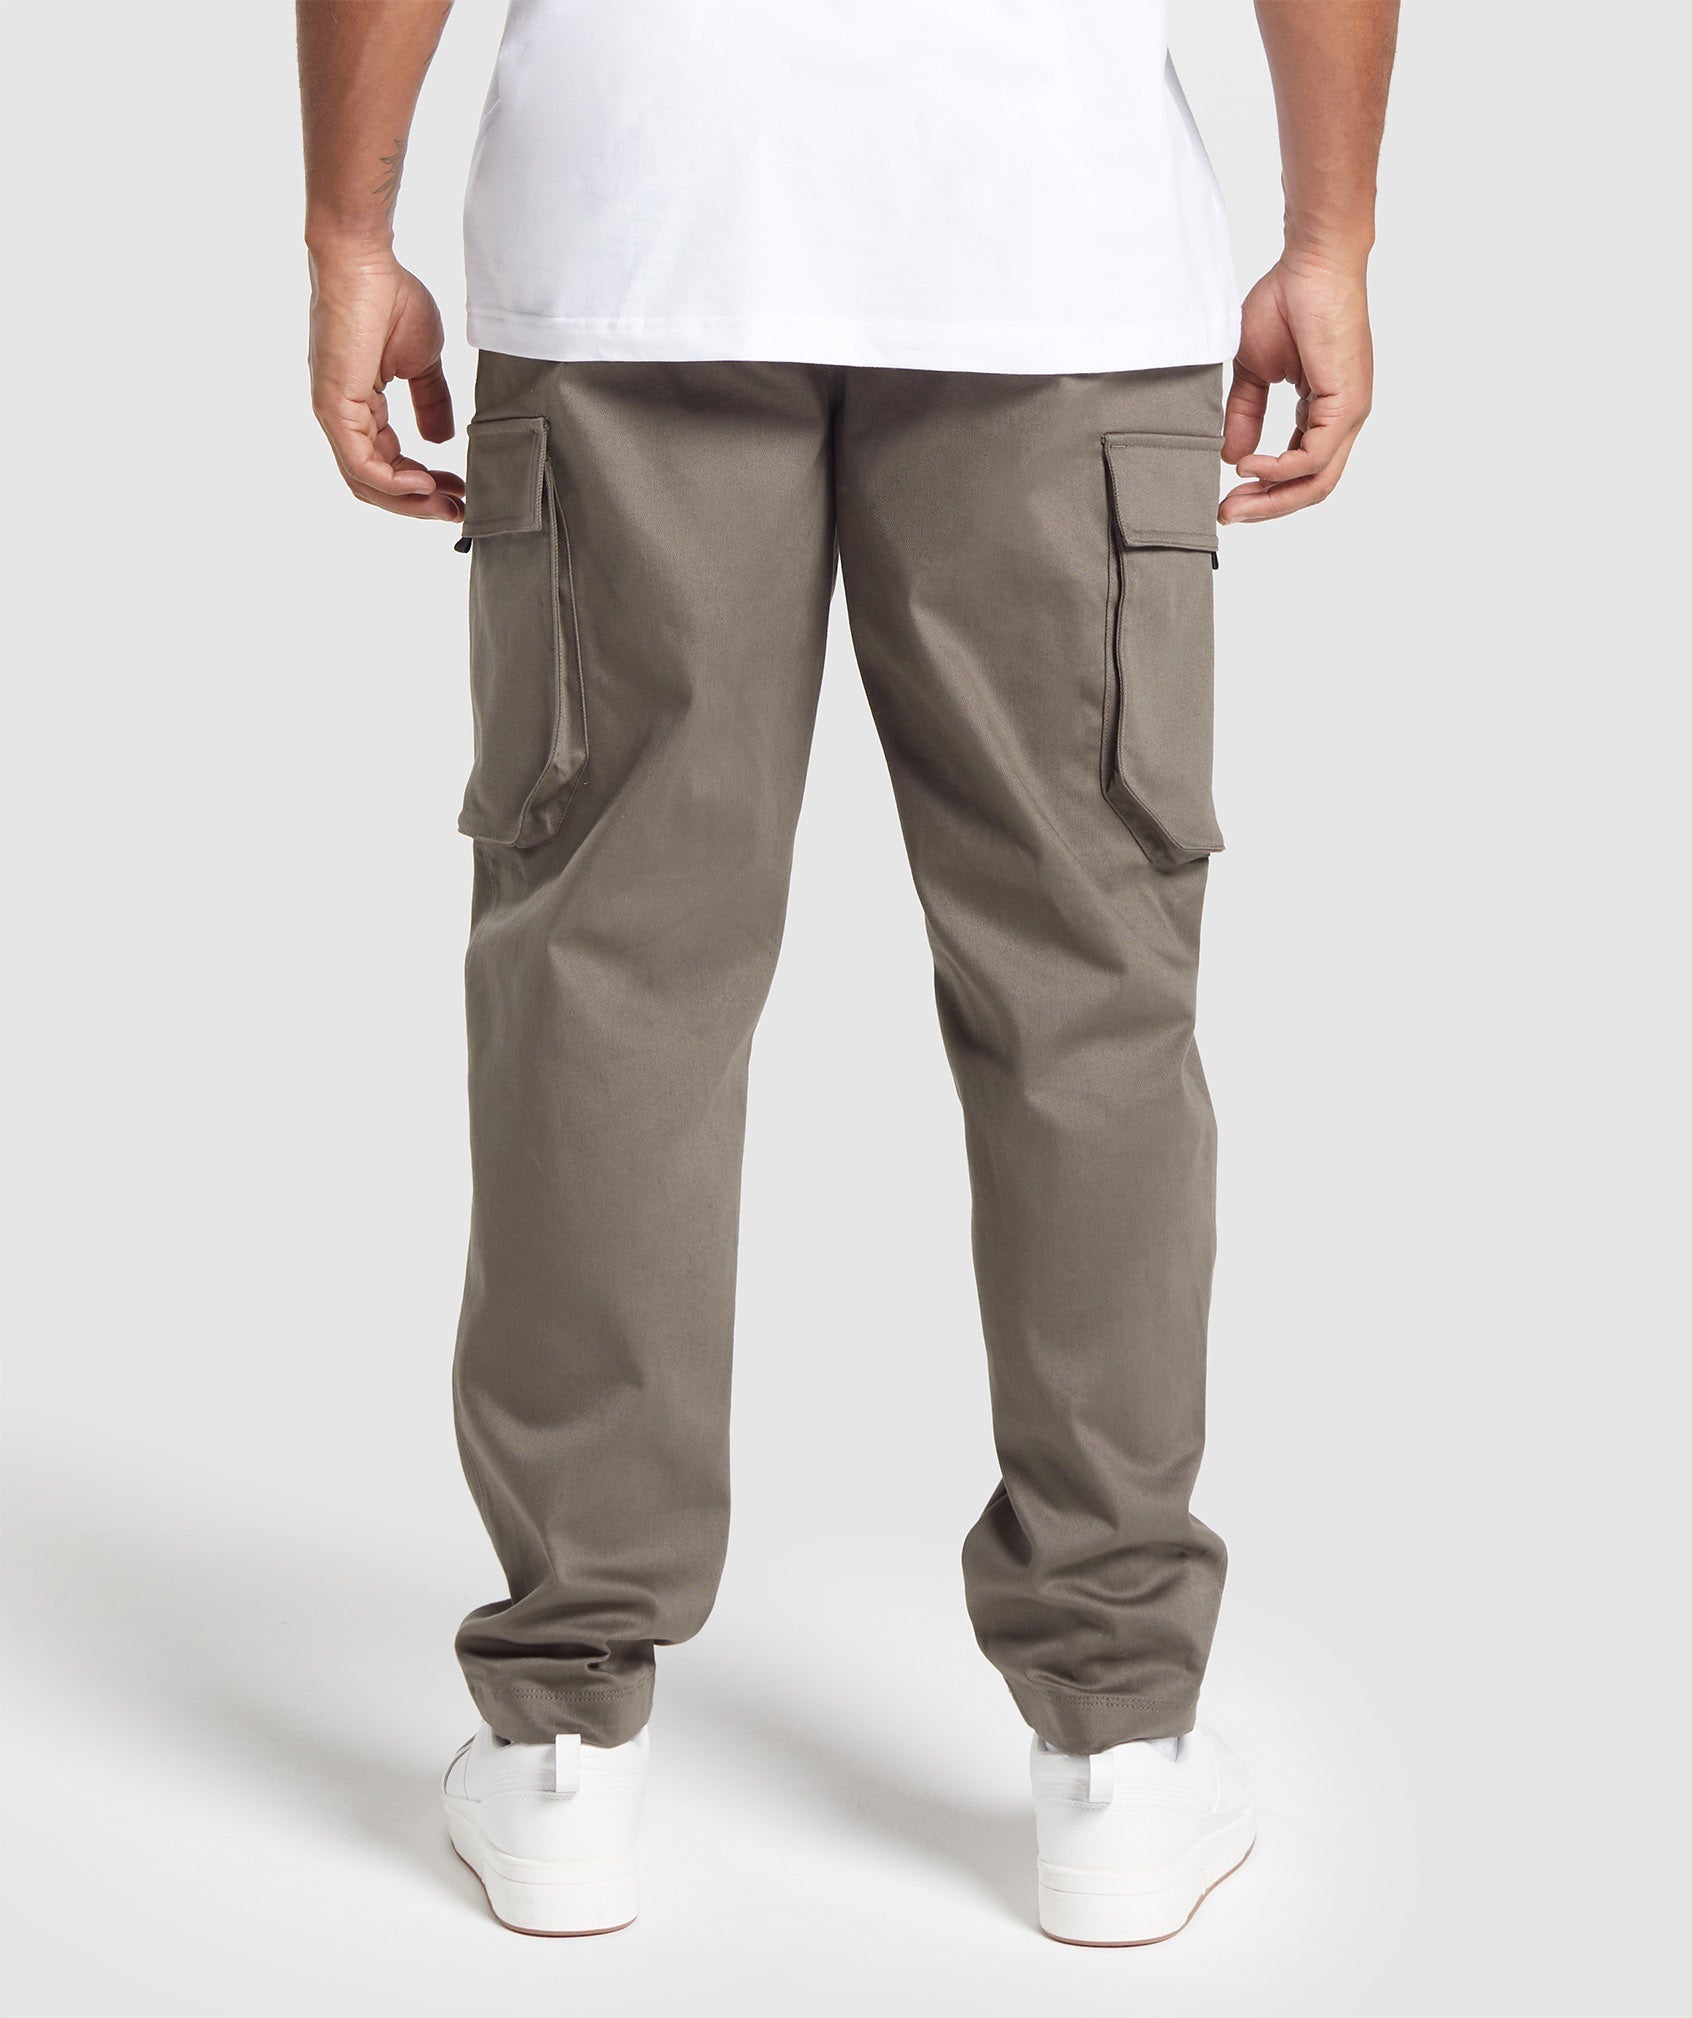 Rest Day Woven Cargo Pants in Camo Brown - view 3